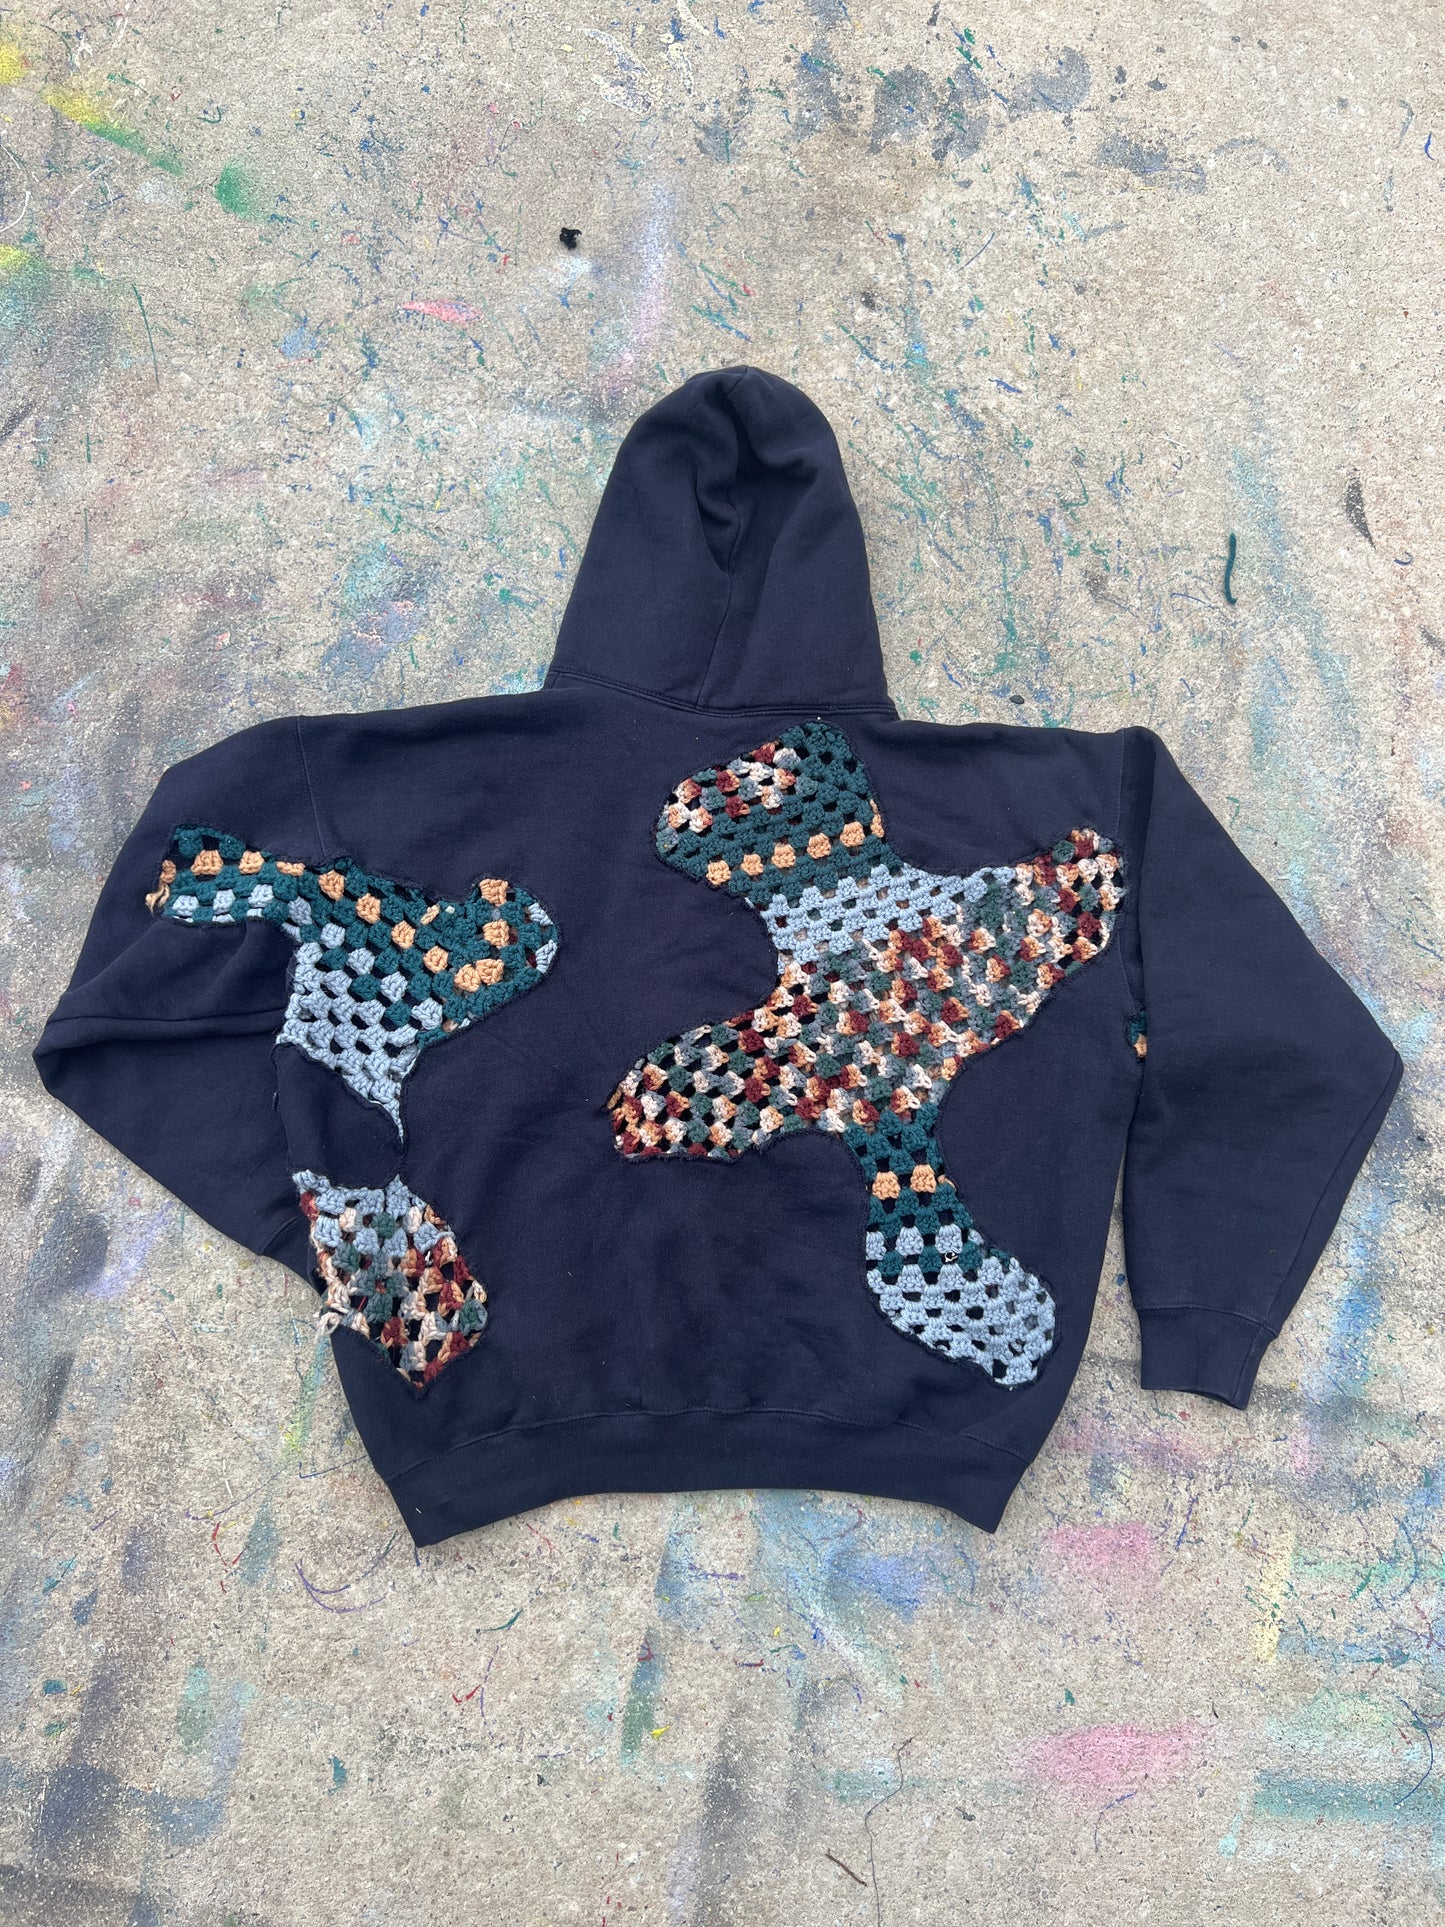 Scab Patches Zip-Up Hoodie (Multicolor/Navy)- XL